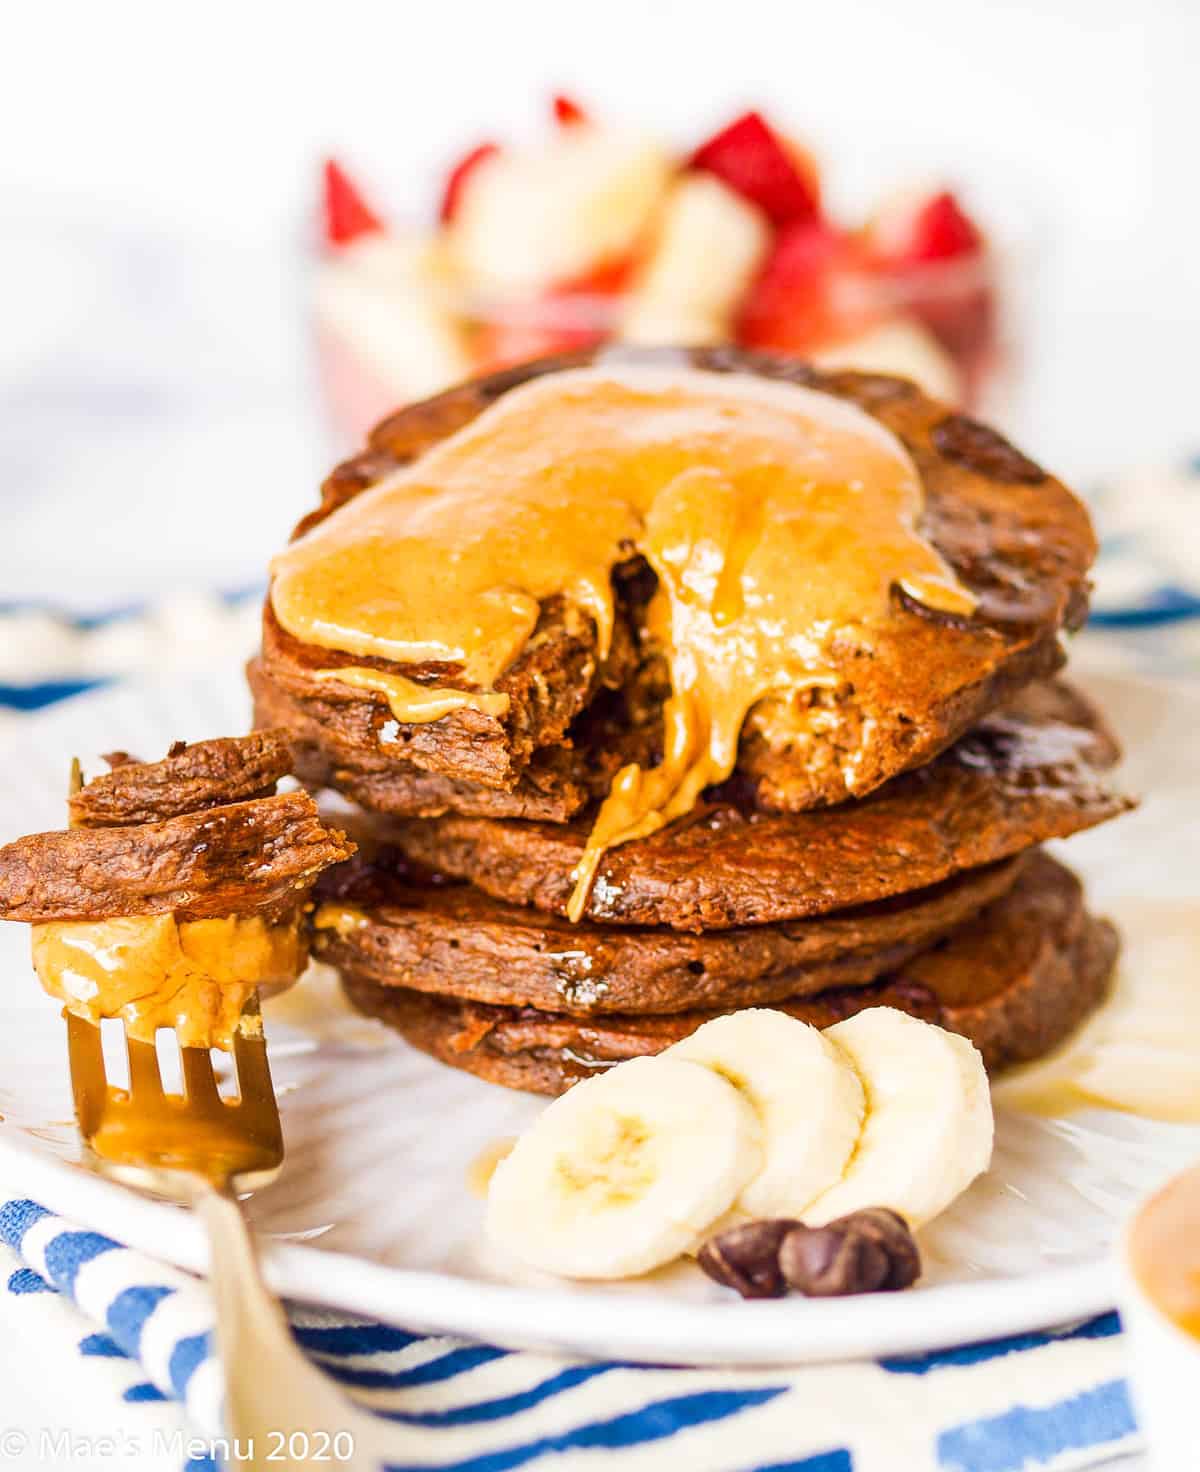 A plate of banana double chocolate pancakes covered in peanut butter. Beside the stack of pancakes sits a forkful of pancakes with peanut butter, banana slices, and chocolate chips